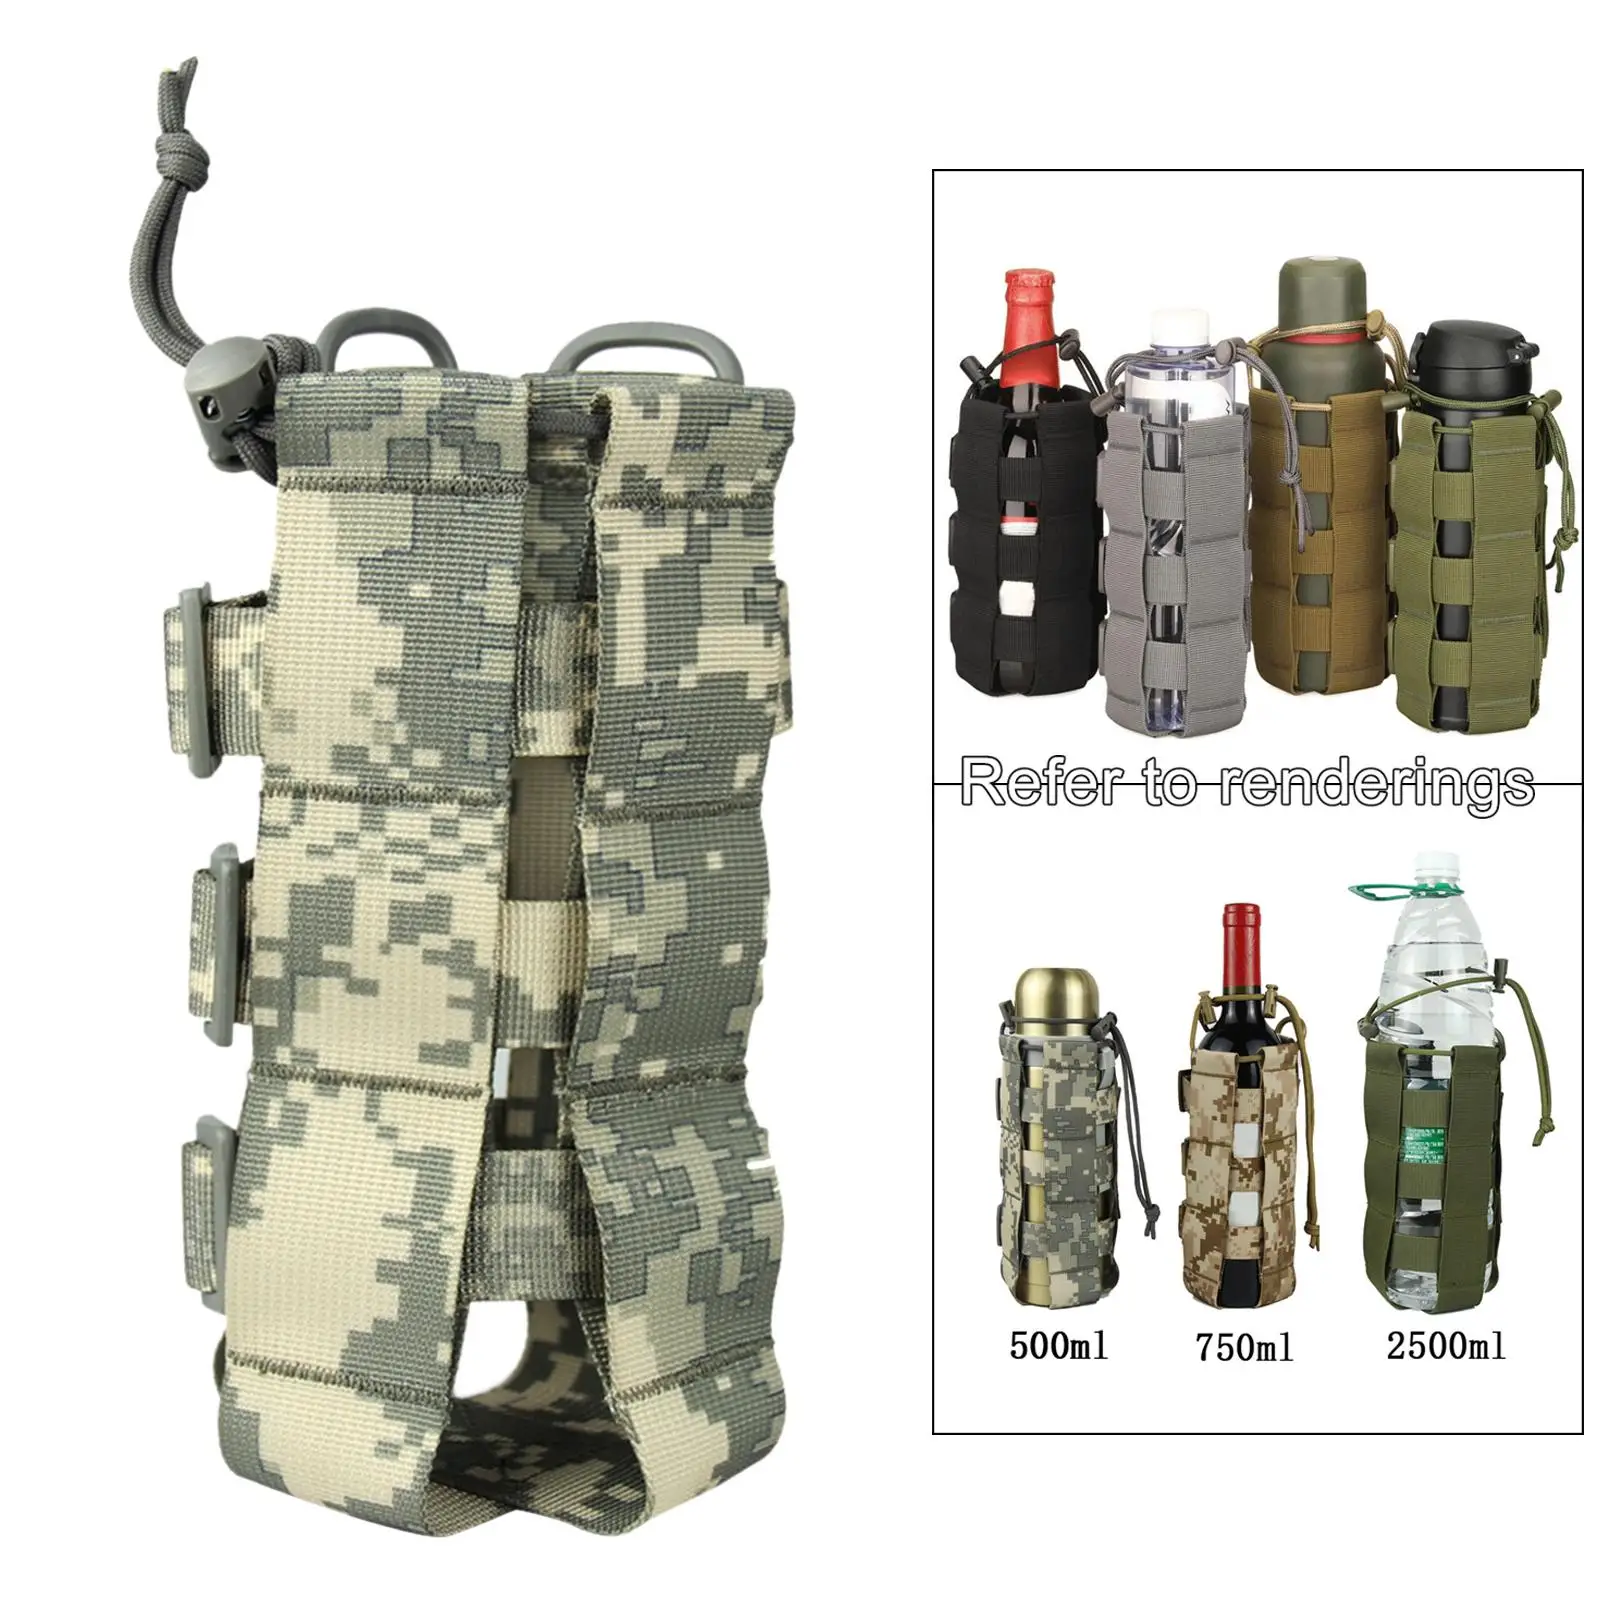  Bottles Pouch   Water Bottle Pouch Drawstring Water Bottle Holder Mesh Water Bottle Carrier, Waterproof and Wear Resistant